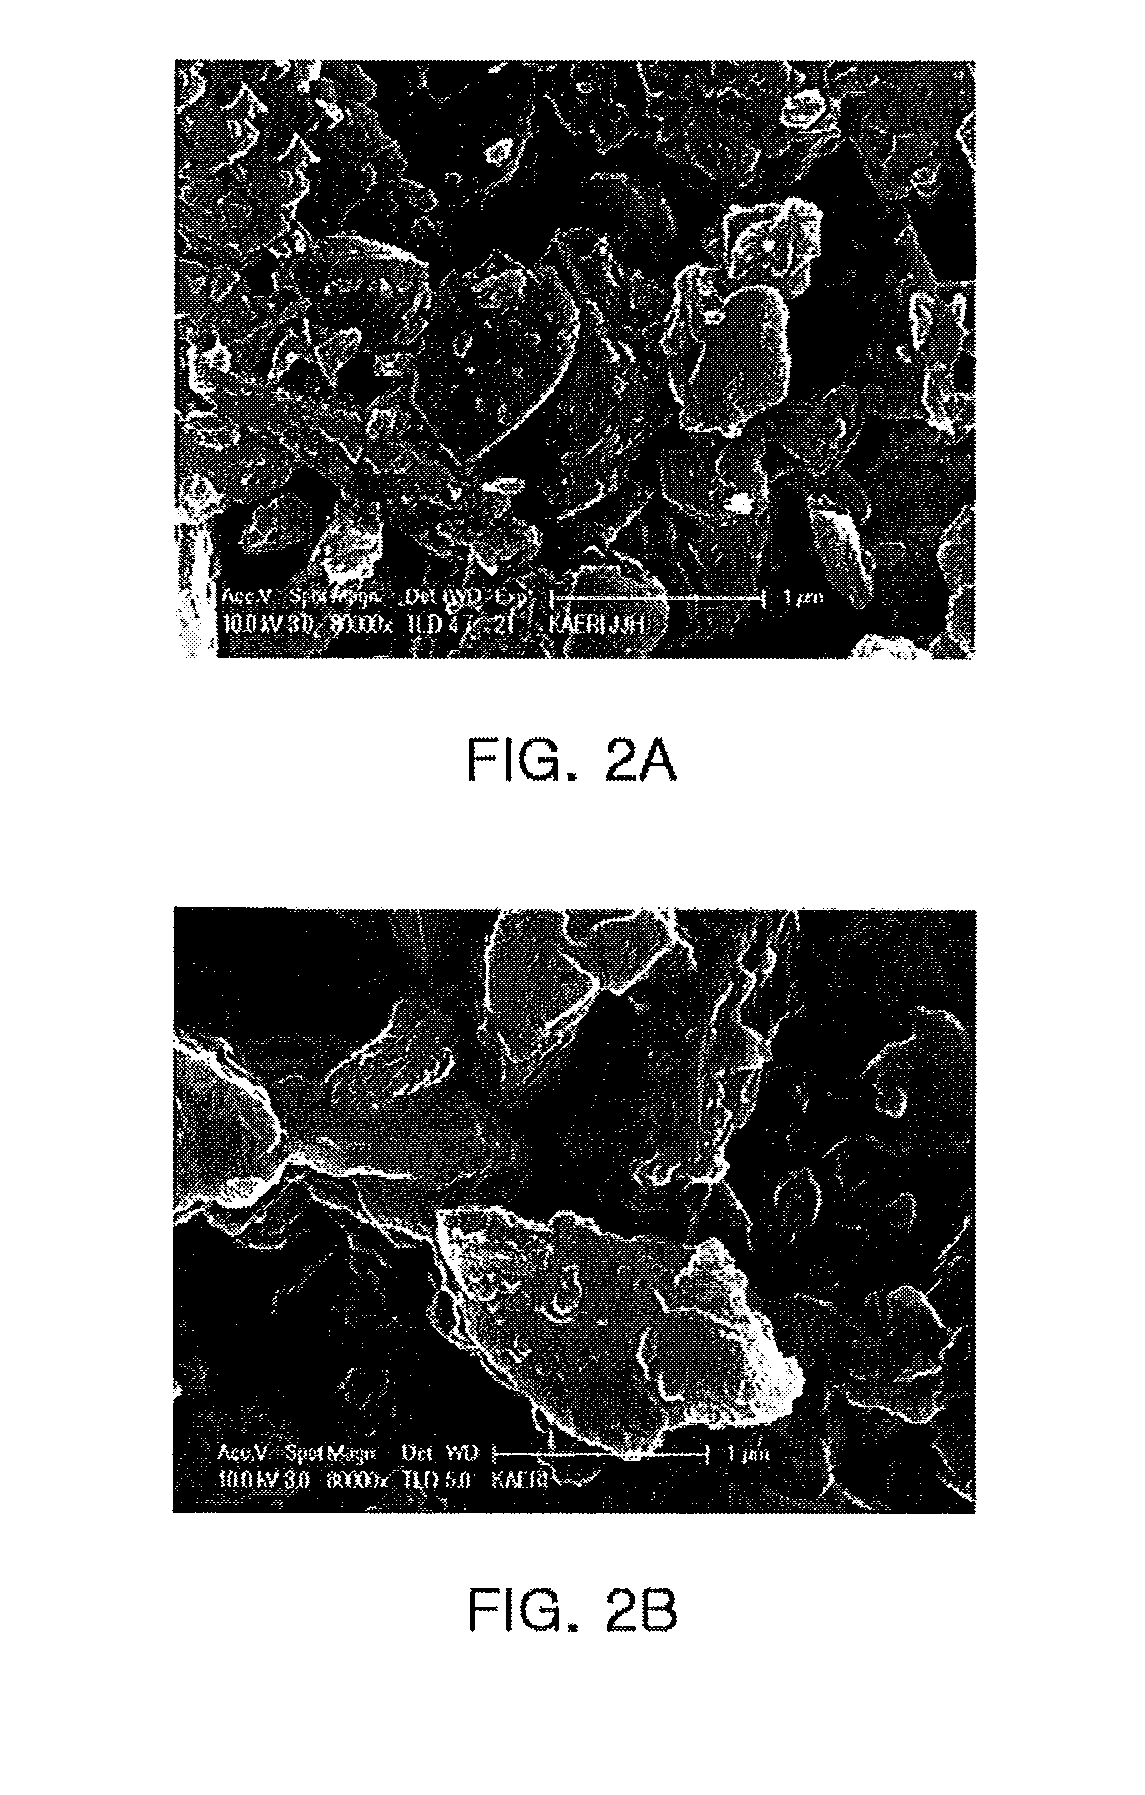 Epoxy resin composition for neutron shielding, and method for preparing the same